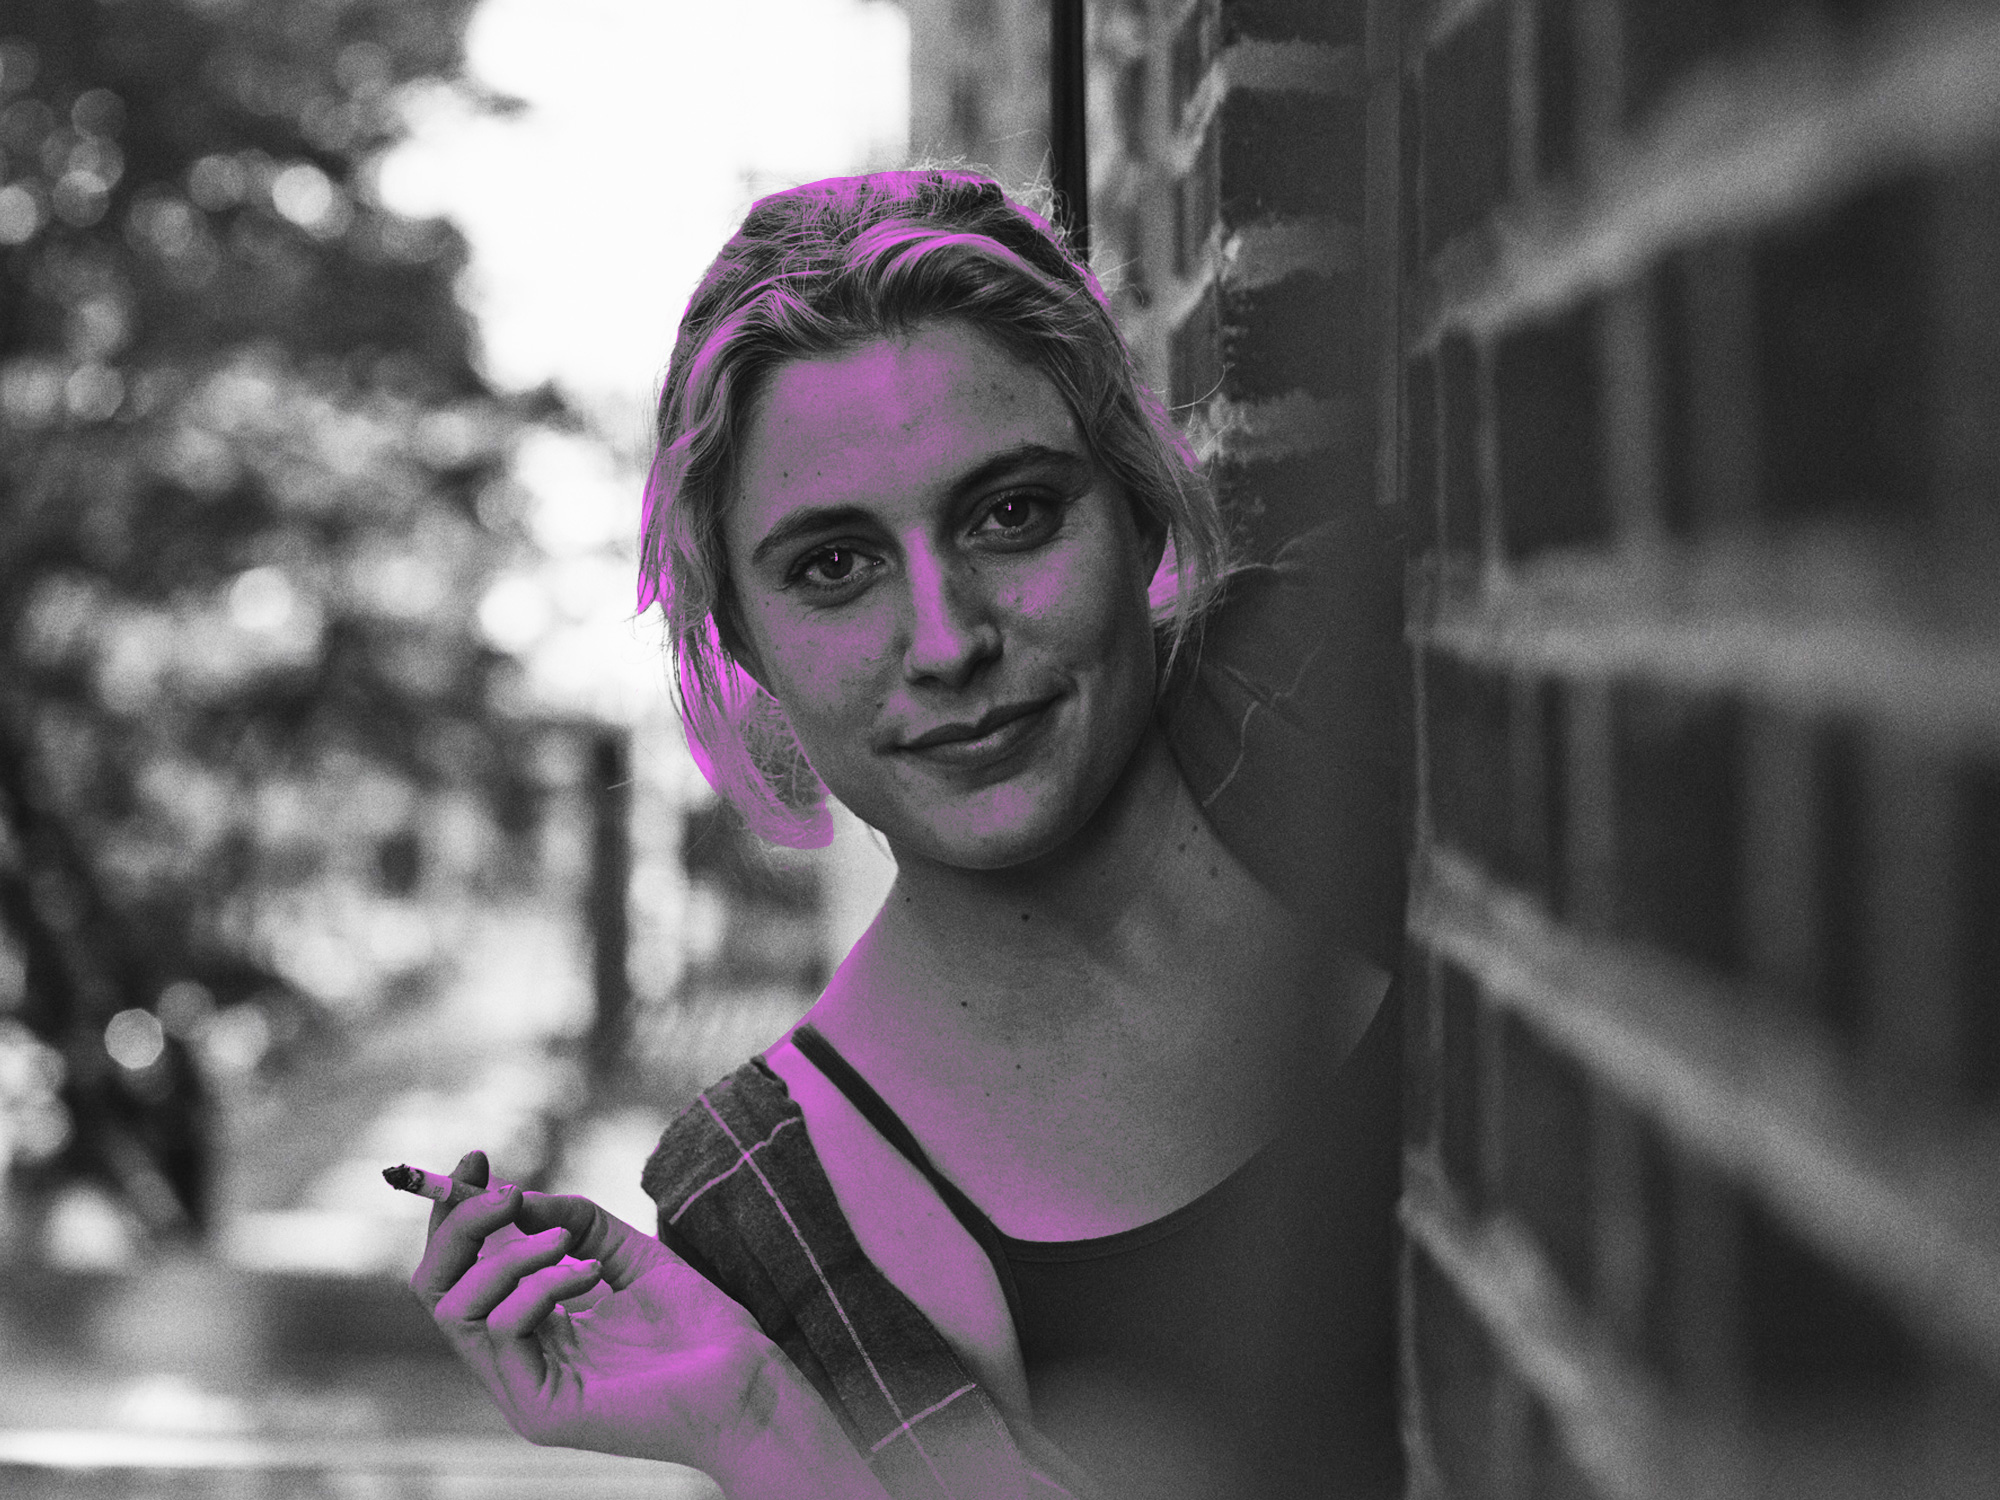 Frances Ha understands the power of female friendship